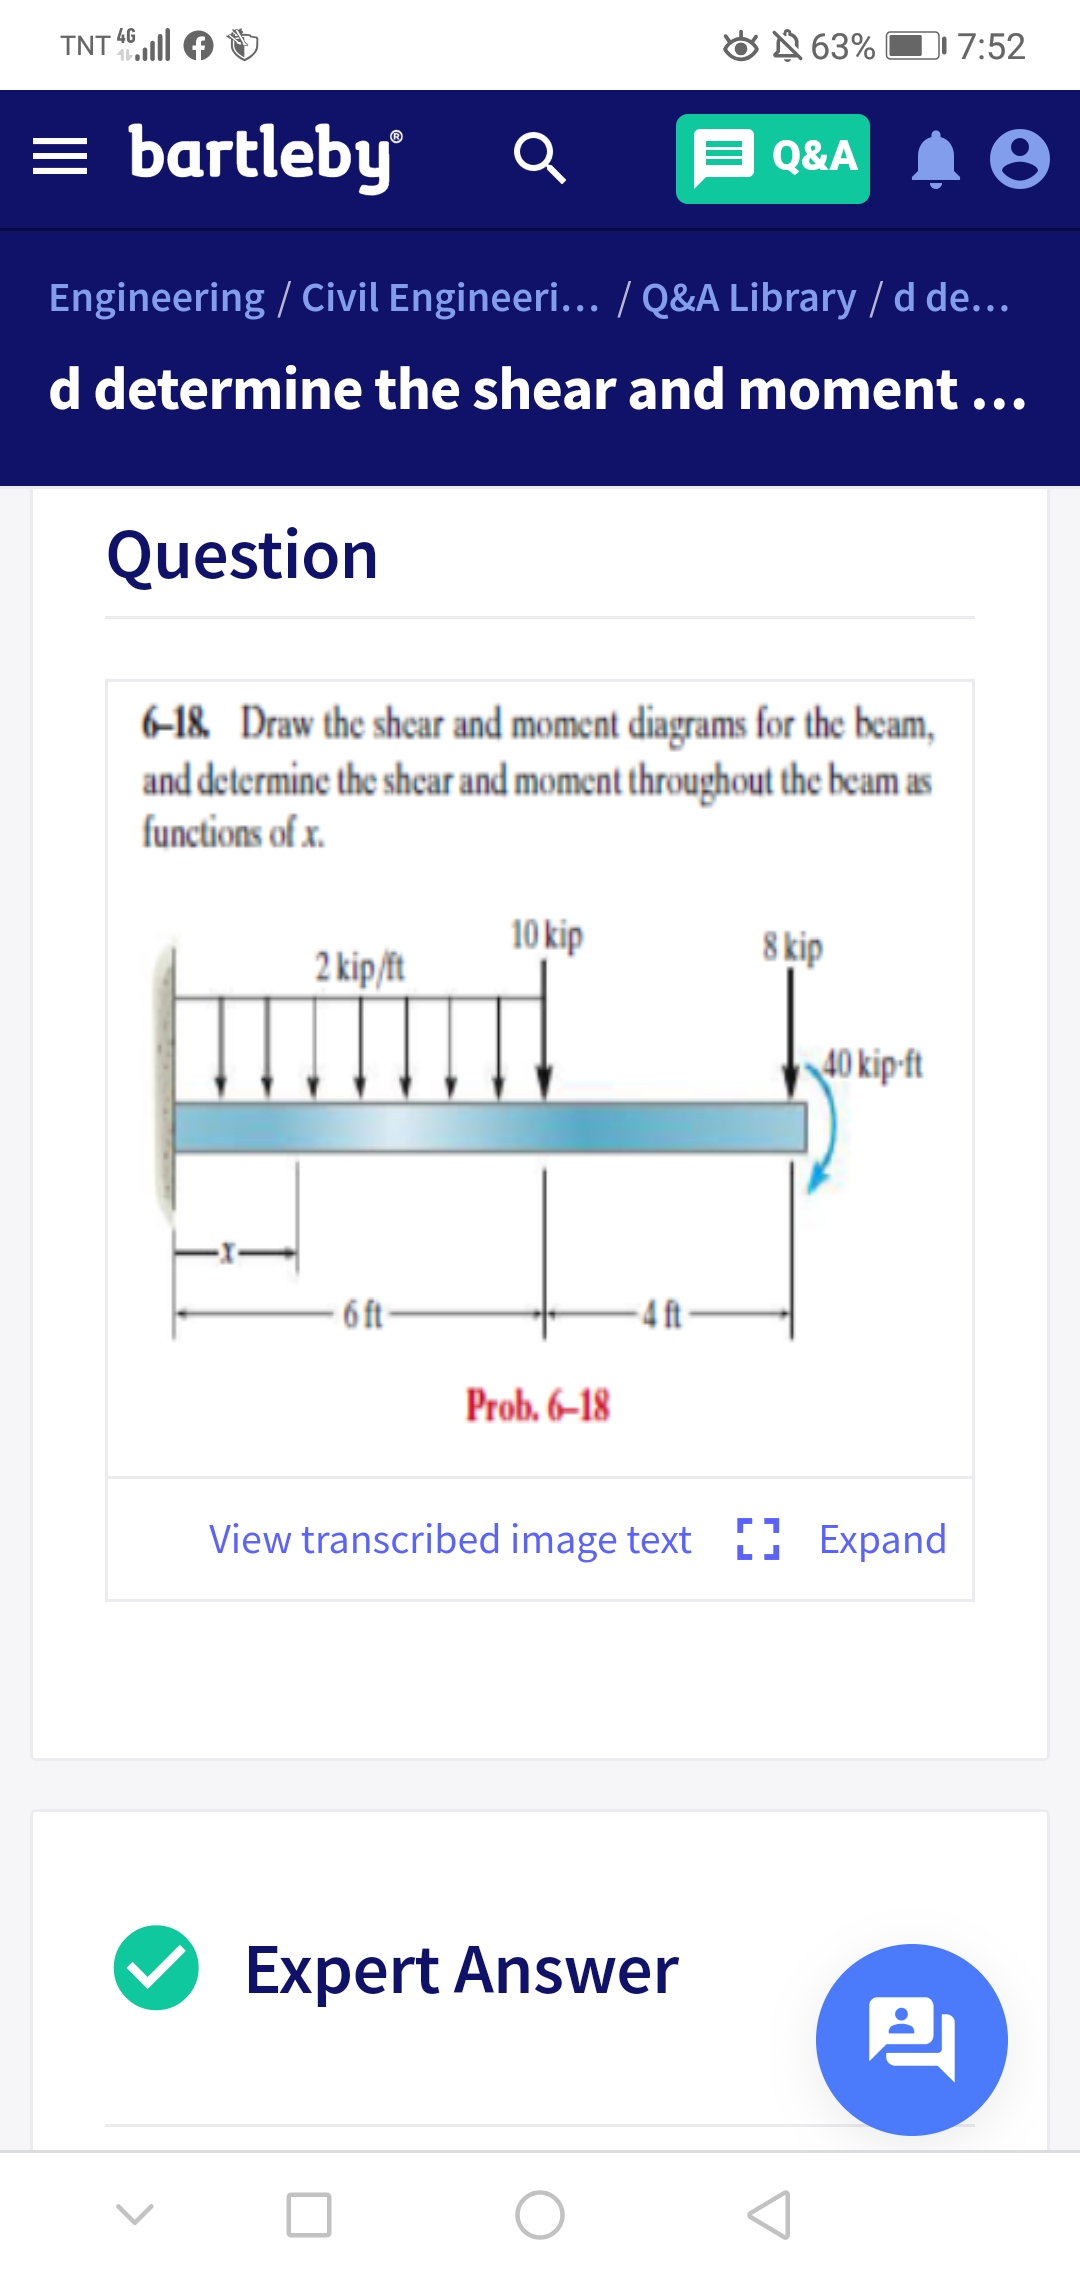 4G
TNT
O N 63% O 7:52
= bartleby
Q&A 1 0
Engineering / Civil Engineeri... / Q&A Library / d de...
d determine the shear and moment ...
Question
6-18 Draw the shear and moment diagrams for the beam,
and determine the shcar and moment throughout the beam as
functions of x.
10 kip
8 kip
2 kip/ft
40 kip-ft
- 6 ft
4 ft-
Prob. 6–18
View transcribed image text [ Expand
Expert Answer
